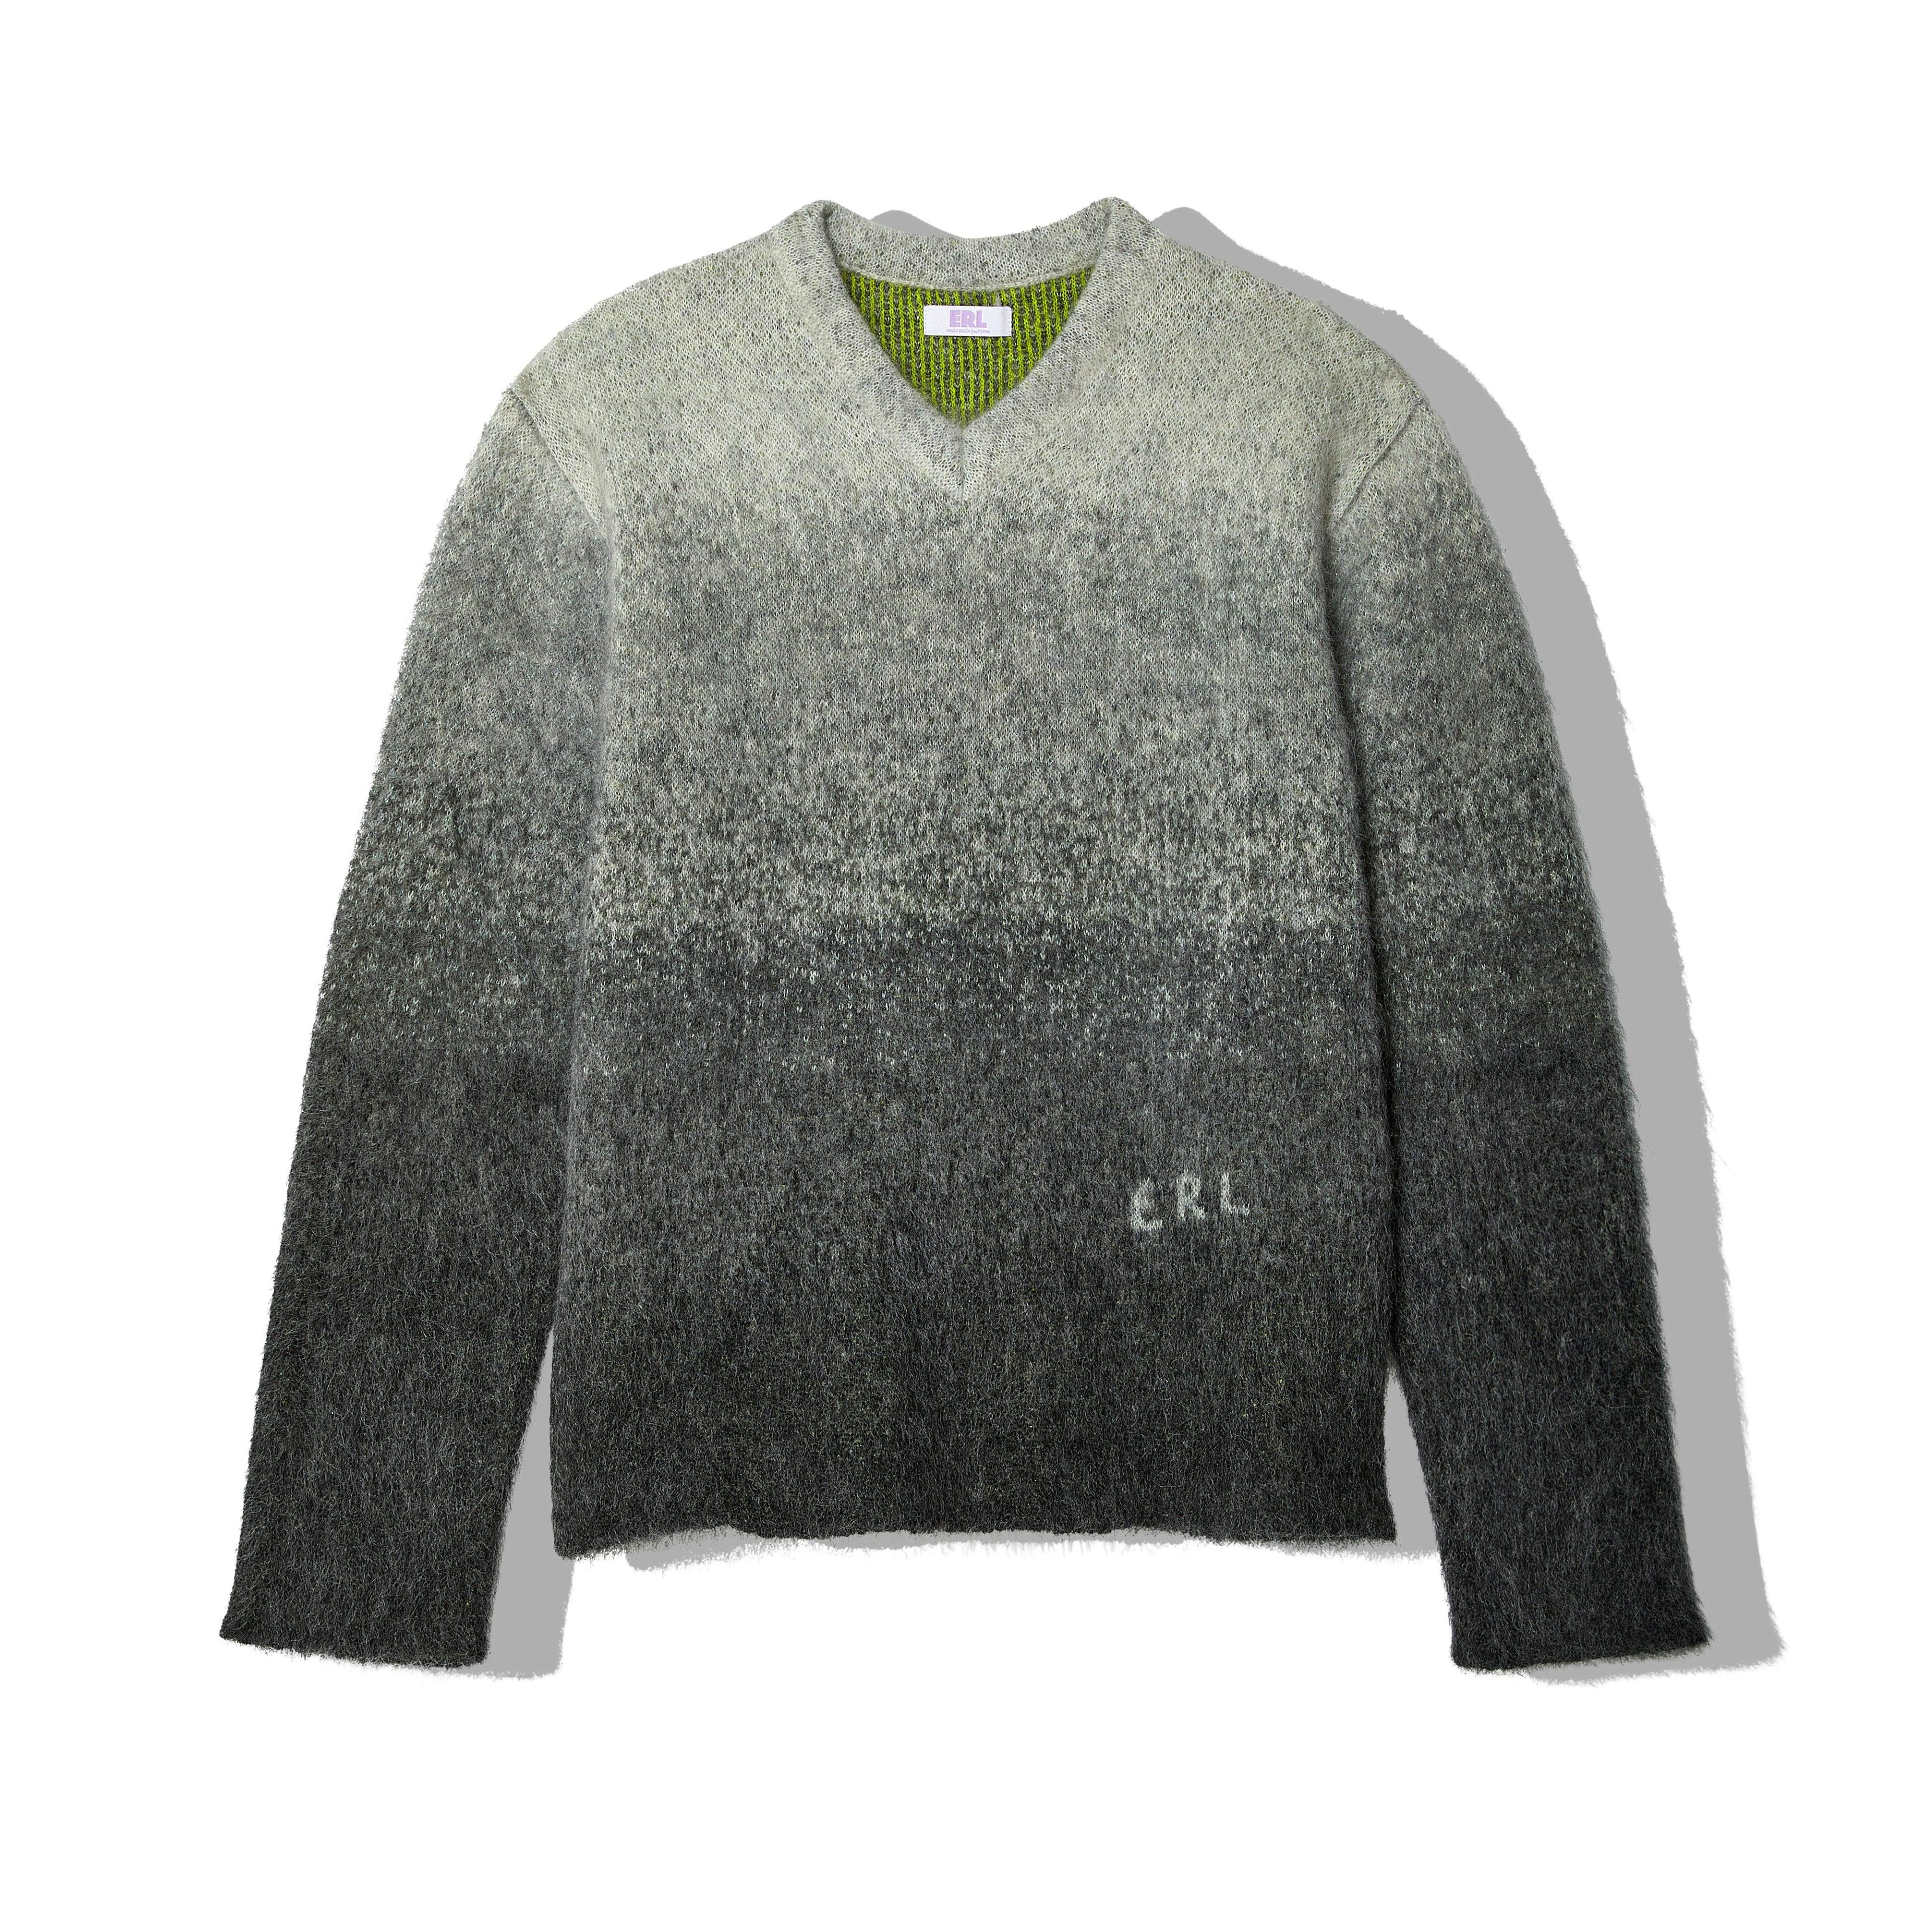 ERL - Men's Gradient Classic Pullover - (Grey) by ERL